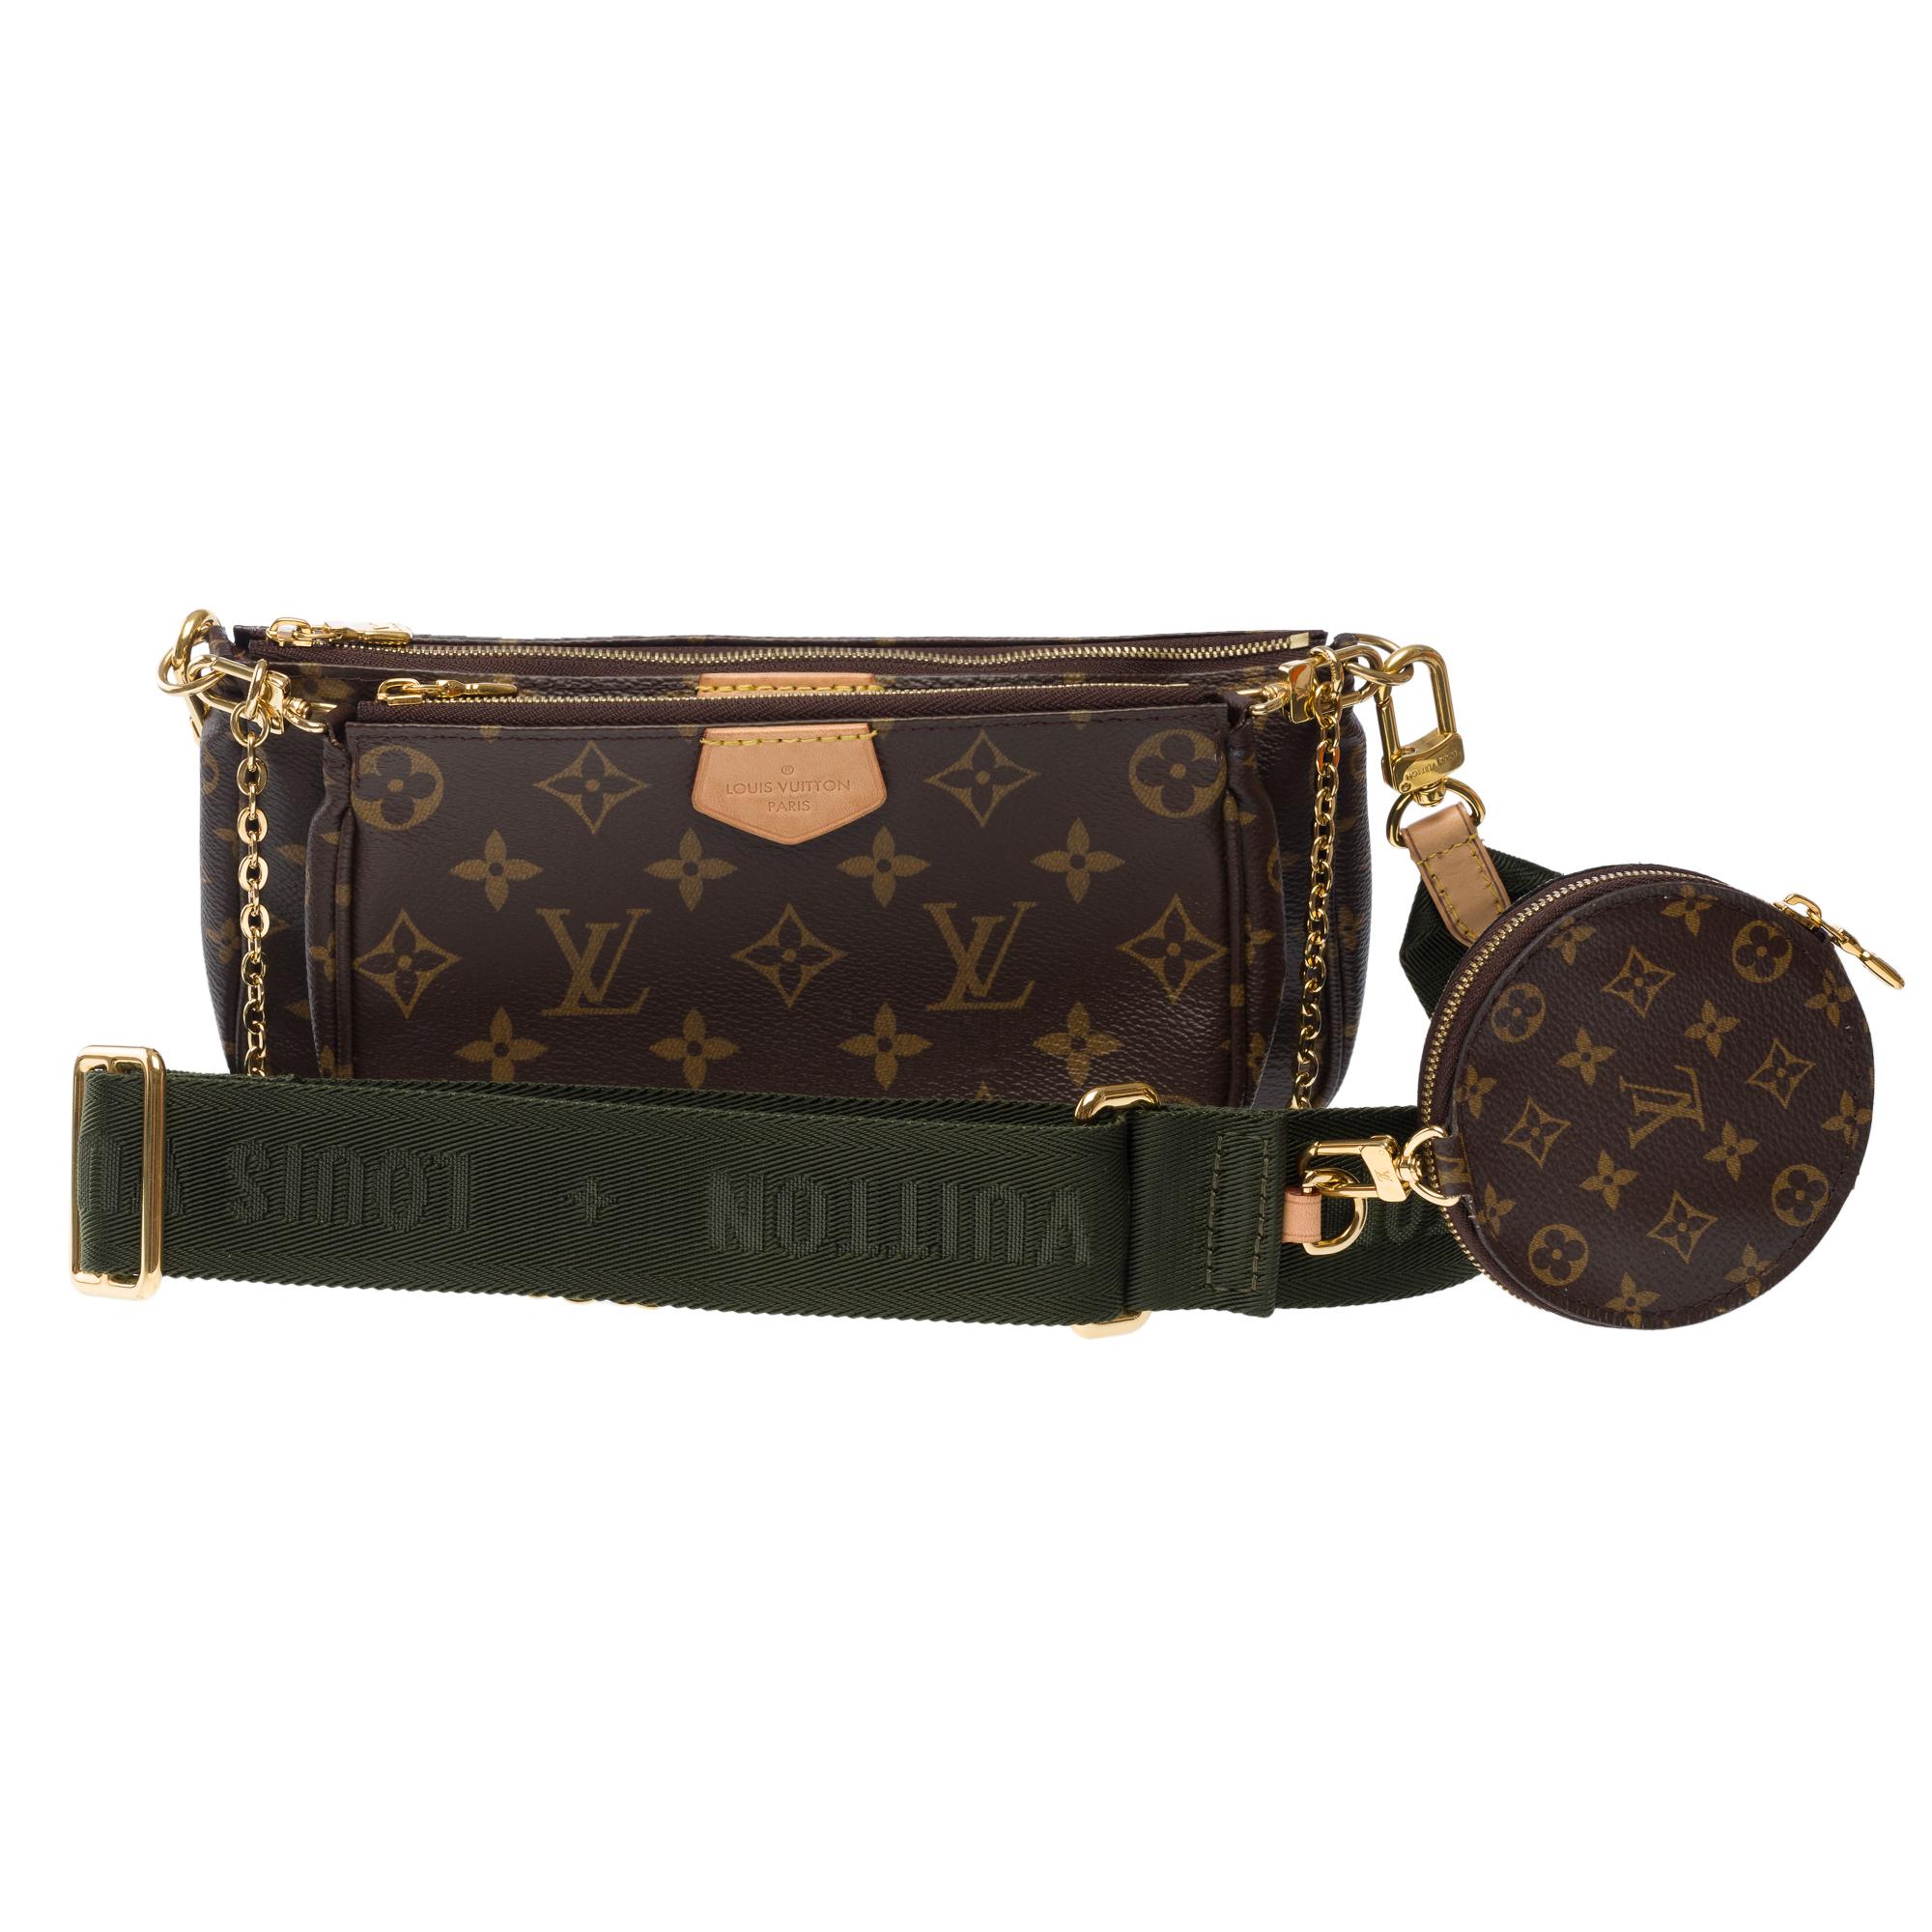 Monogram​ ​canvas​ ​shoulder​ ​bag​ ​Louis​ ​Vuitton​ ​hybrid.​ ​This​ ​multi​ ​pocket​ ​combines​ ​an​ ​accessory​ ​pocket,​ ​a​ ​mini​ ​accessory​ ​pocket​ ​and​ ​a​ ​round​ ​wallet.​ ​It​ ​has​ ​a​ ​removable​ ​chain​ ​and​ ​a​ ​shoulder​ ​strap​